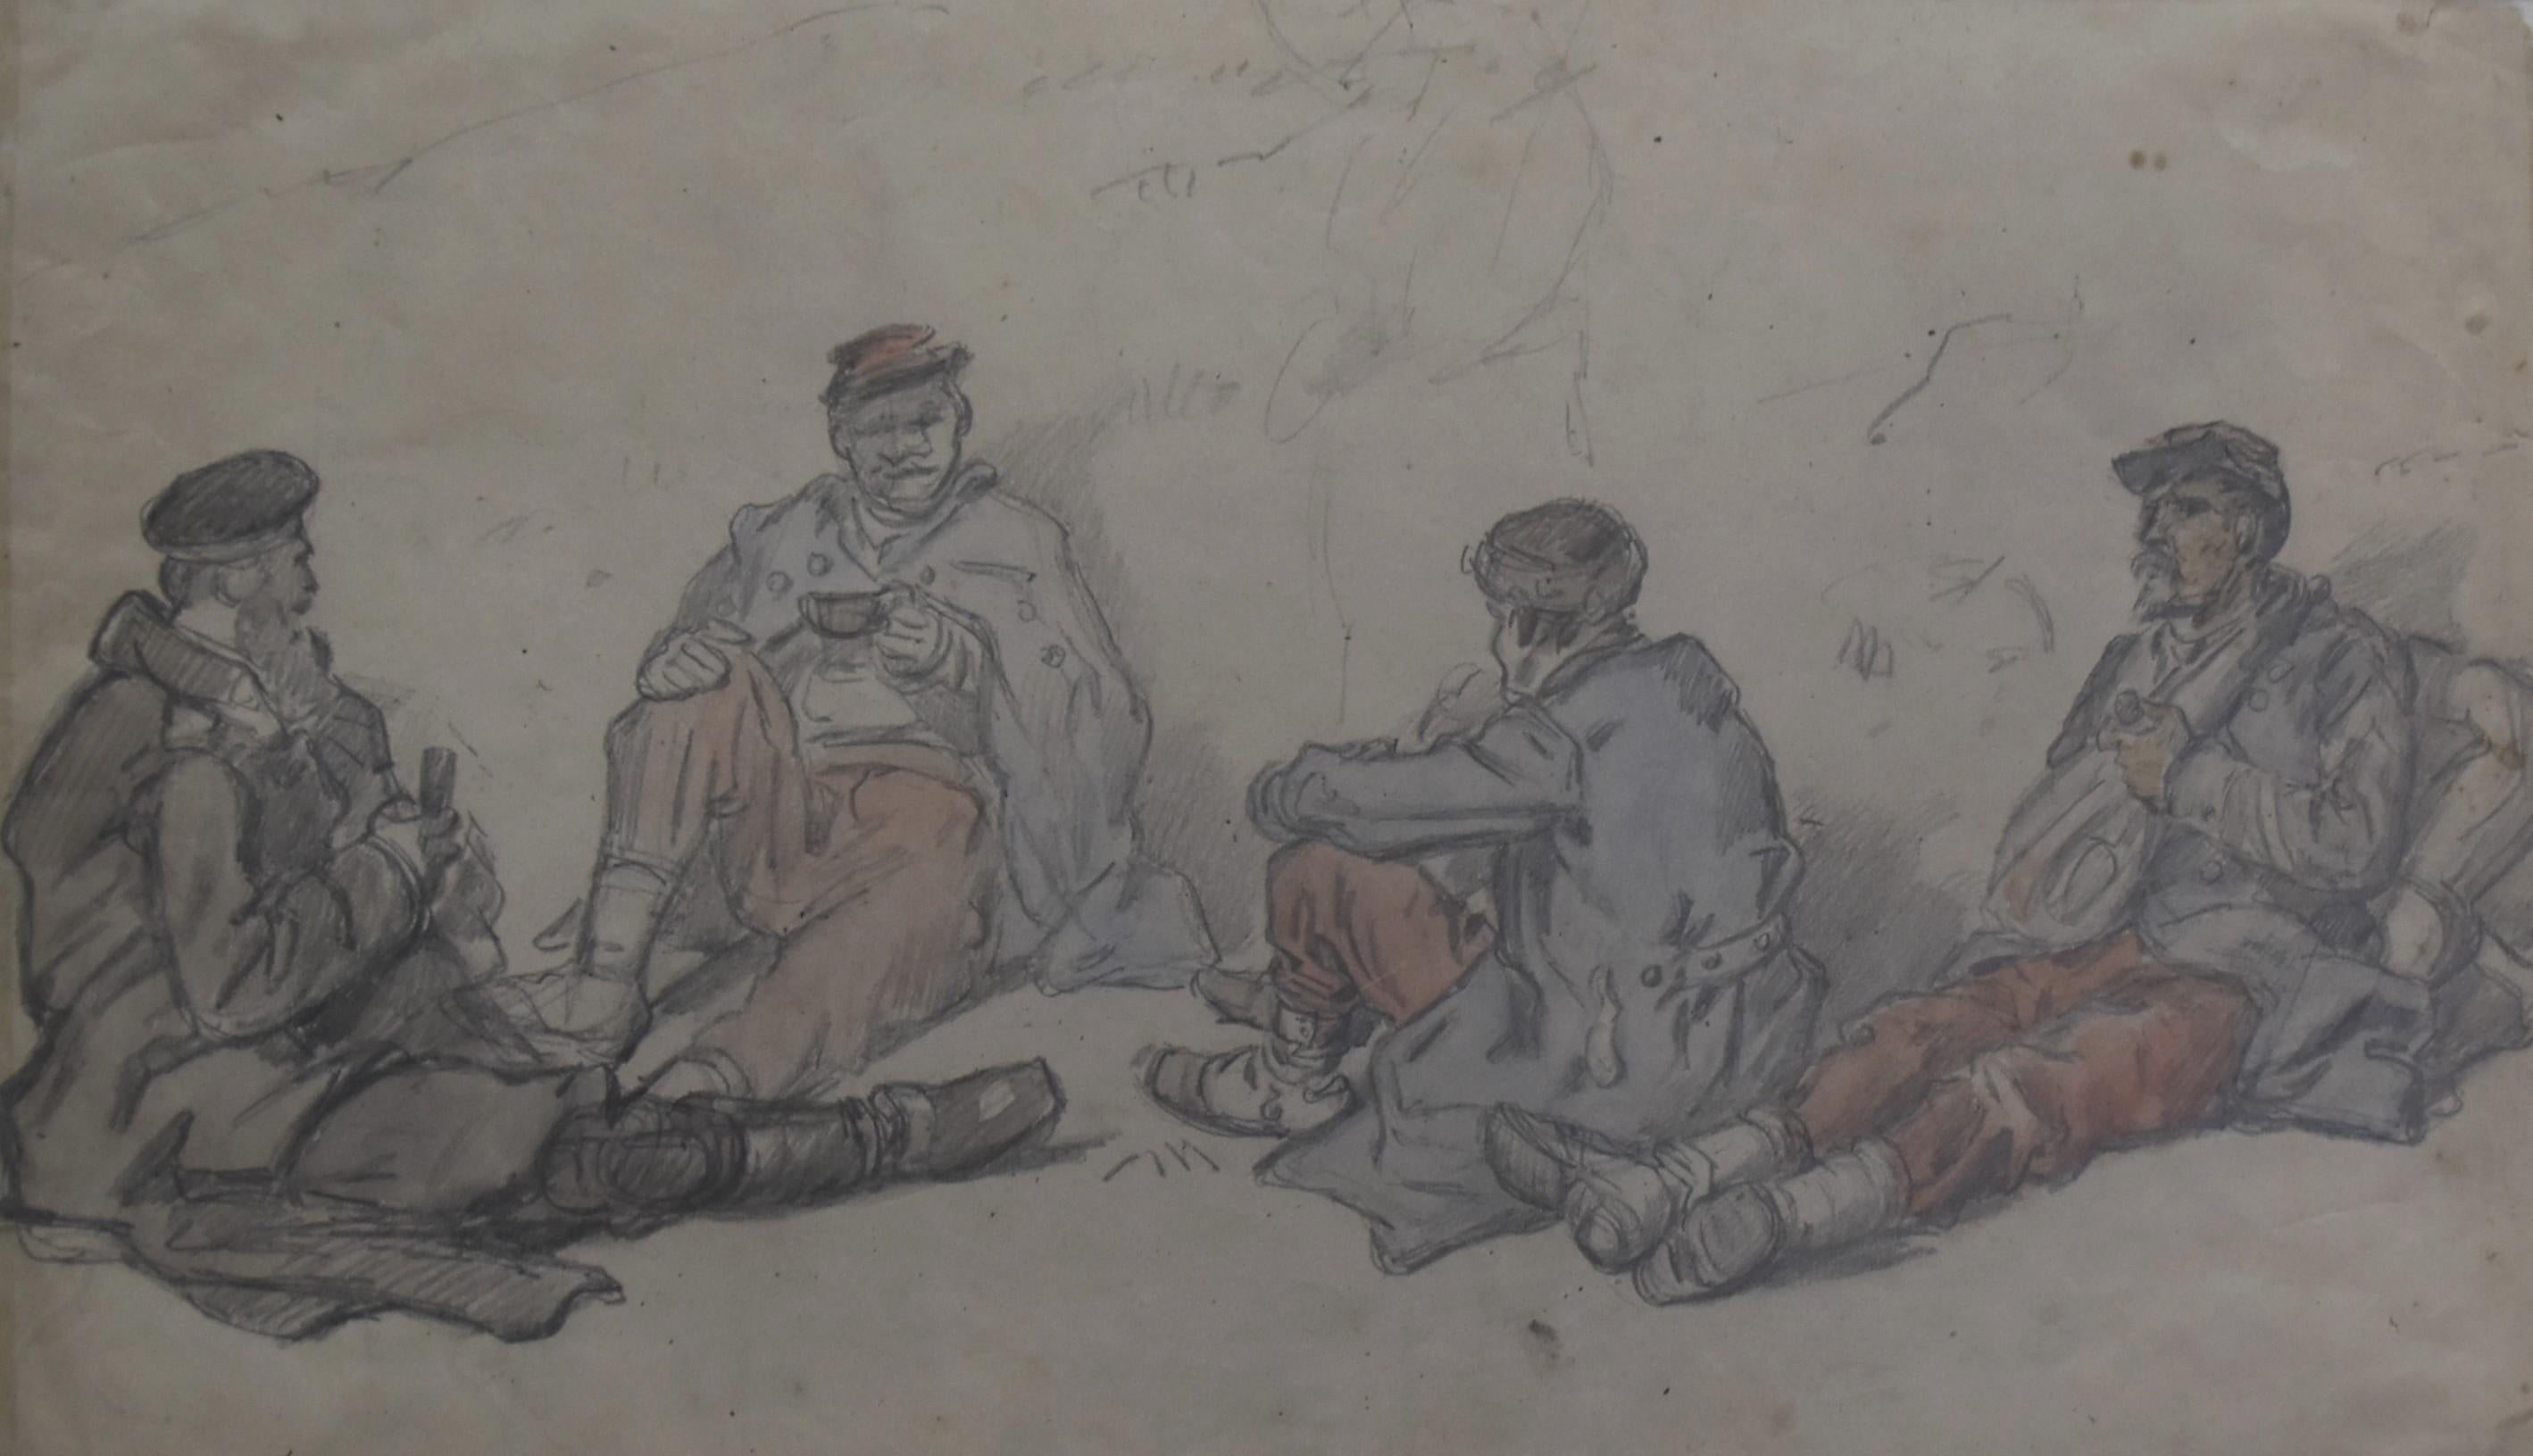 Auguste Gardanne (circa 1840- circa 1890)
Soldiers at rest during the franco-prussian war of 1870
Watercolor on paper
On the reverse Study of a battlefield (?)
Pencil on paper
Mark of the Ullmann Collection (Lugt 3533) on the lower right corner on